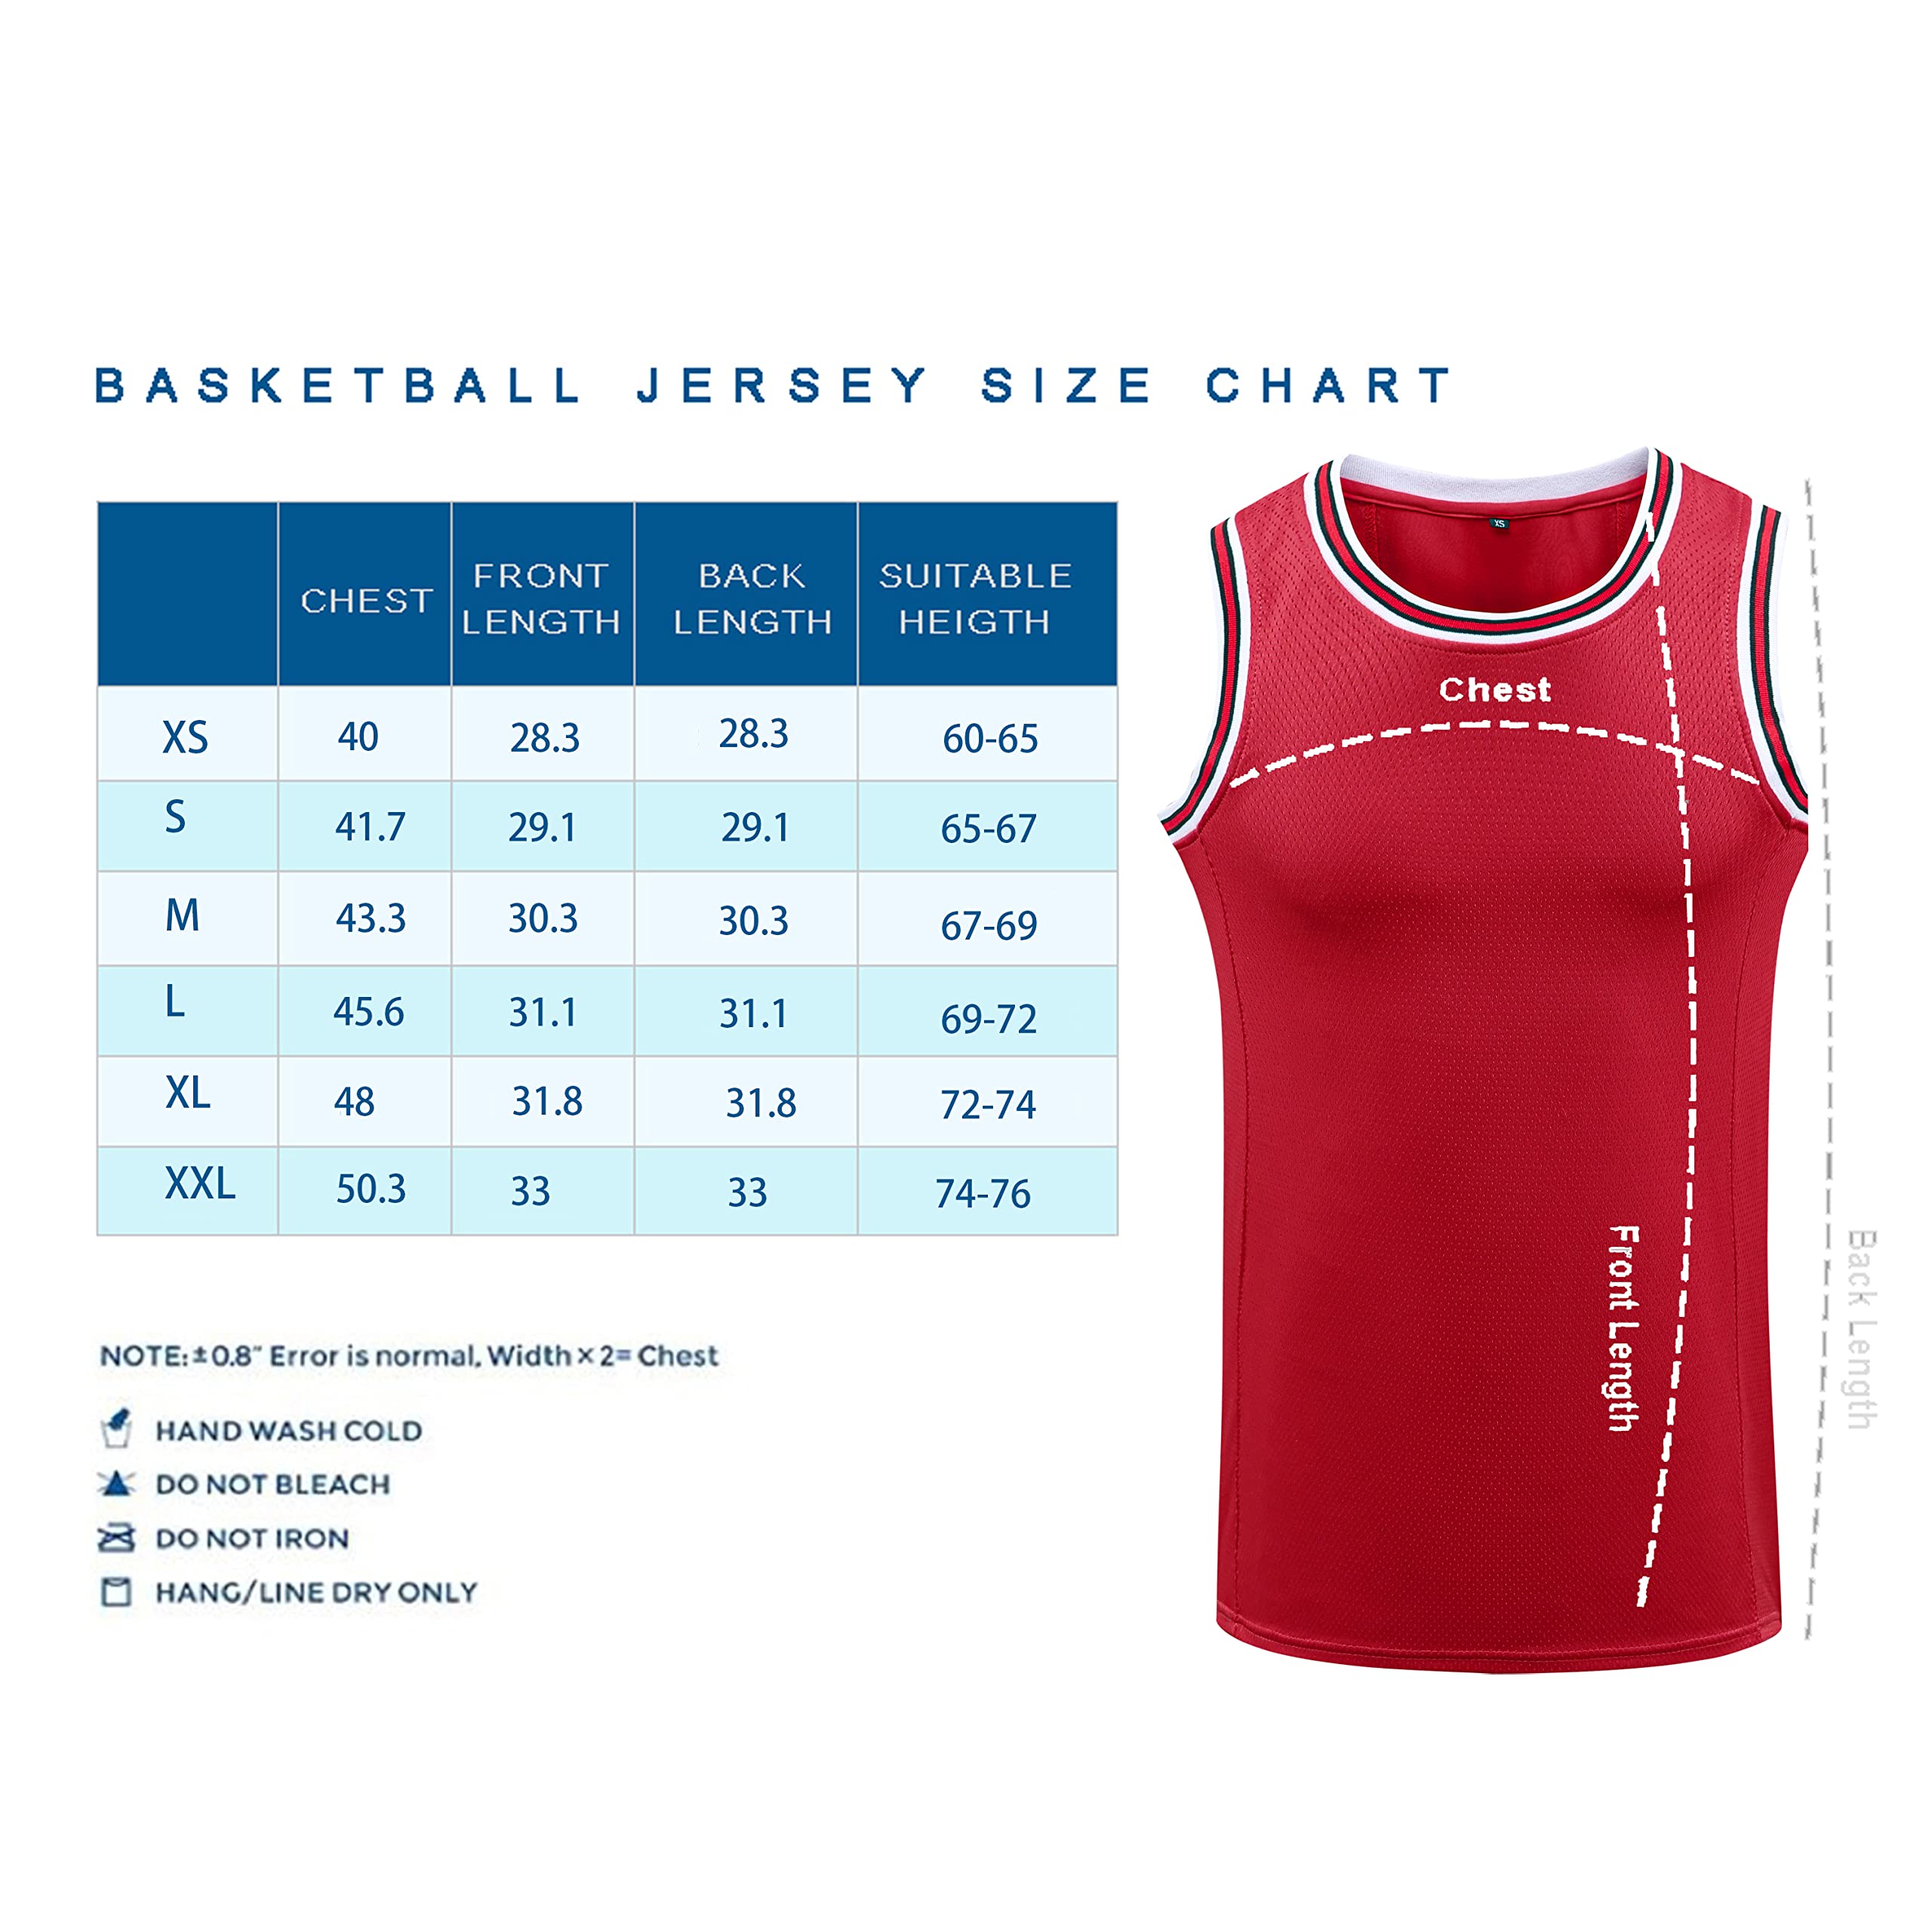 SHAJUNQI Basketball Jersey Men's Mesh Athletic Sports Shirts Training Practice - Blank Team Uniforms for Sports Scrimmage